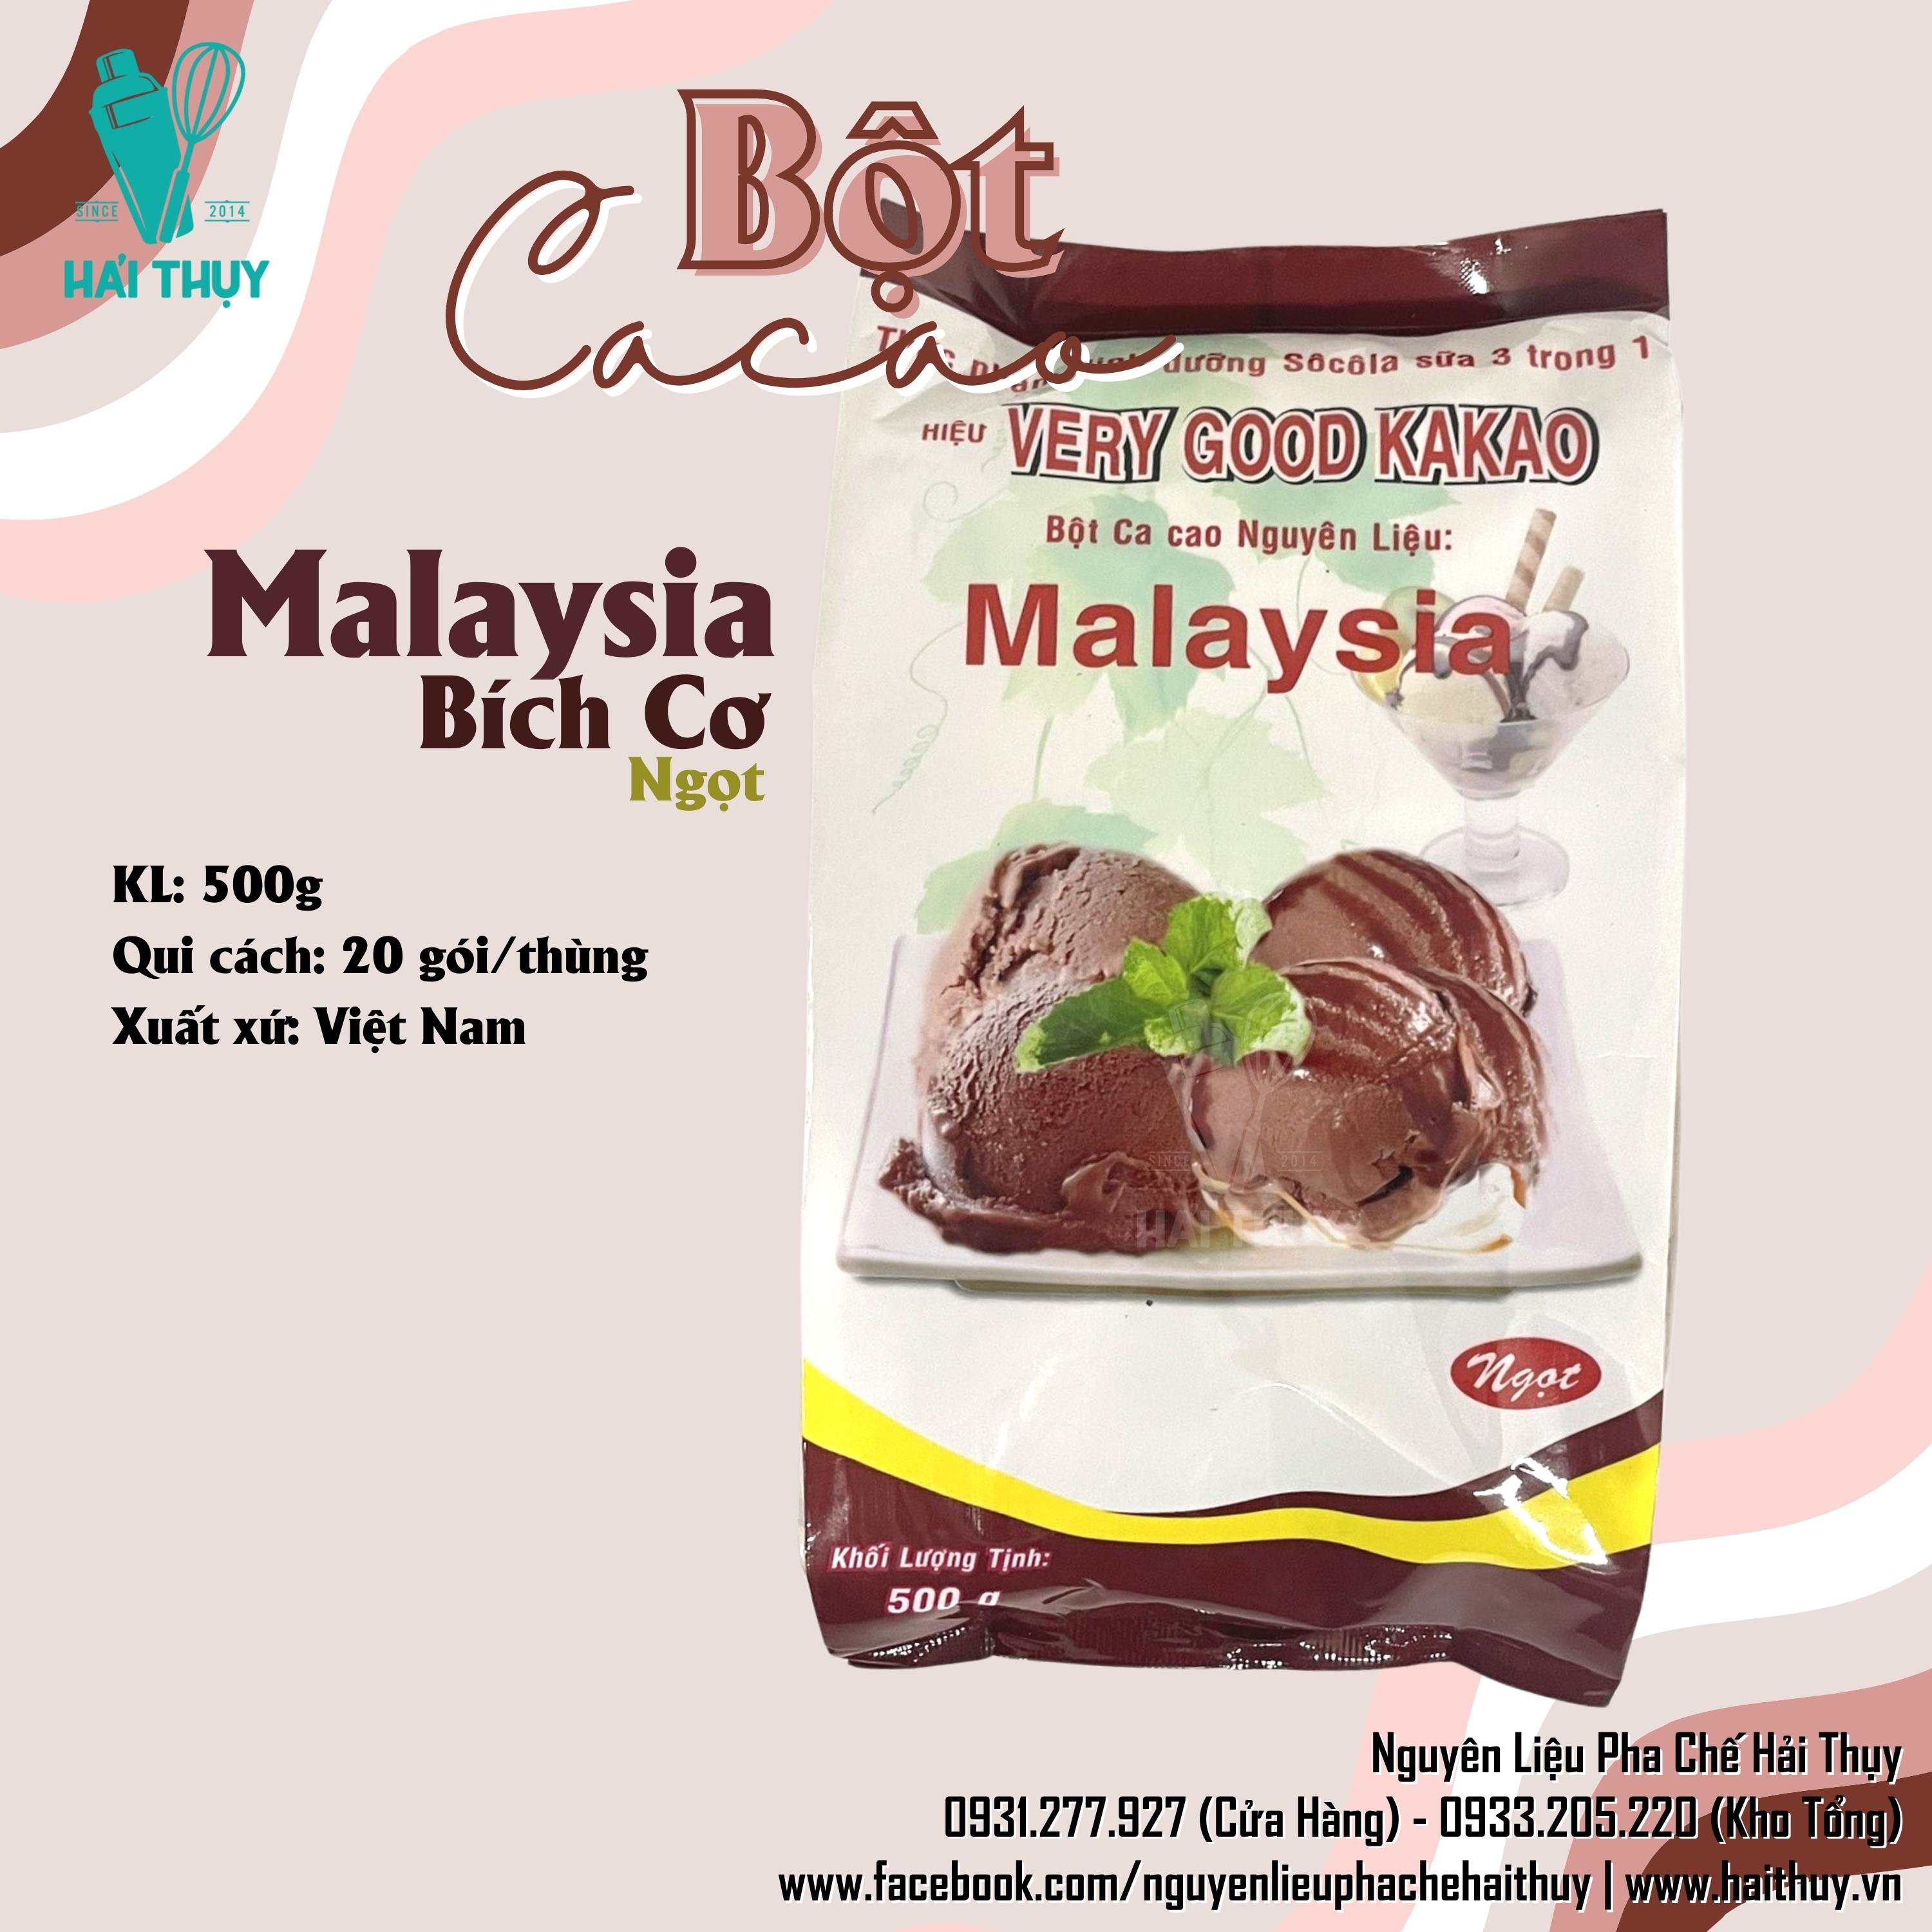 Bột Cacao Malaysia